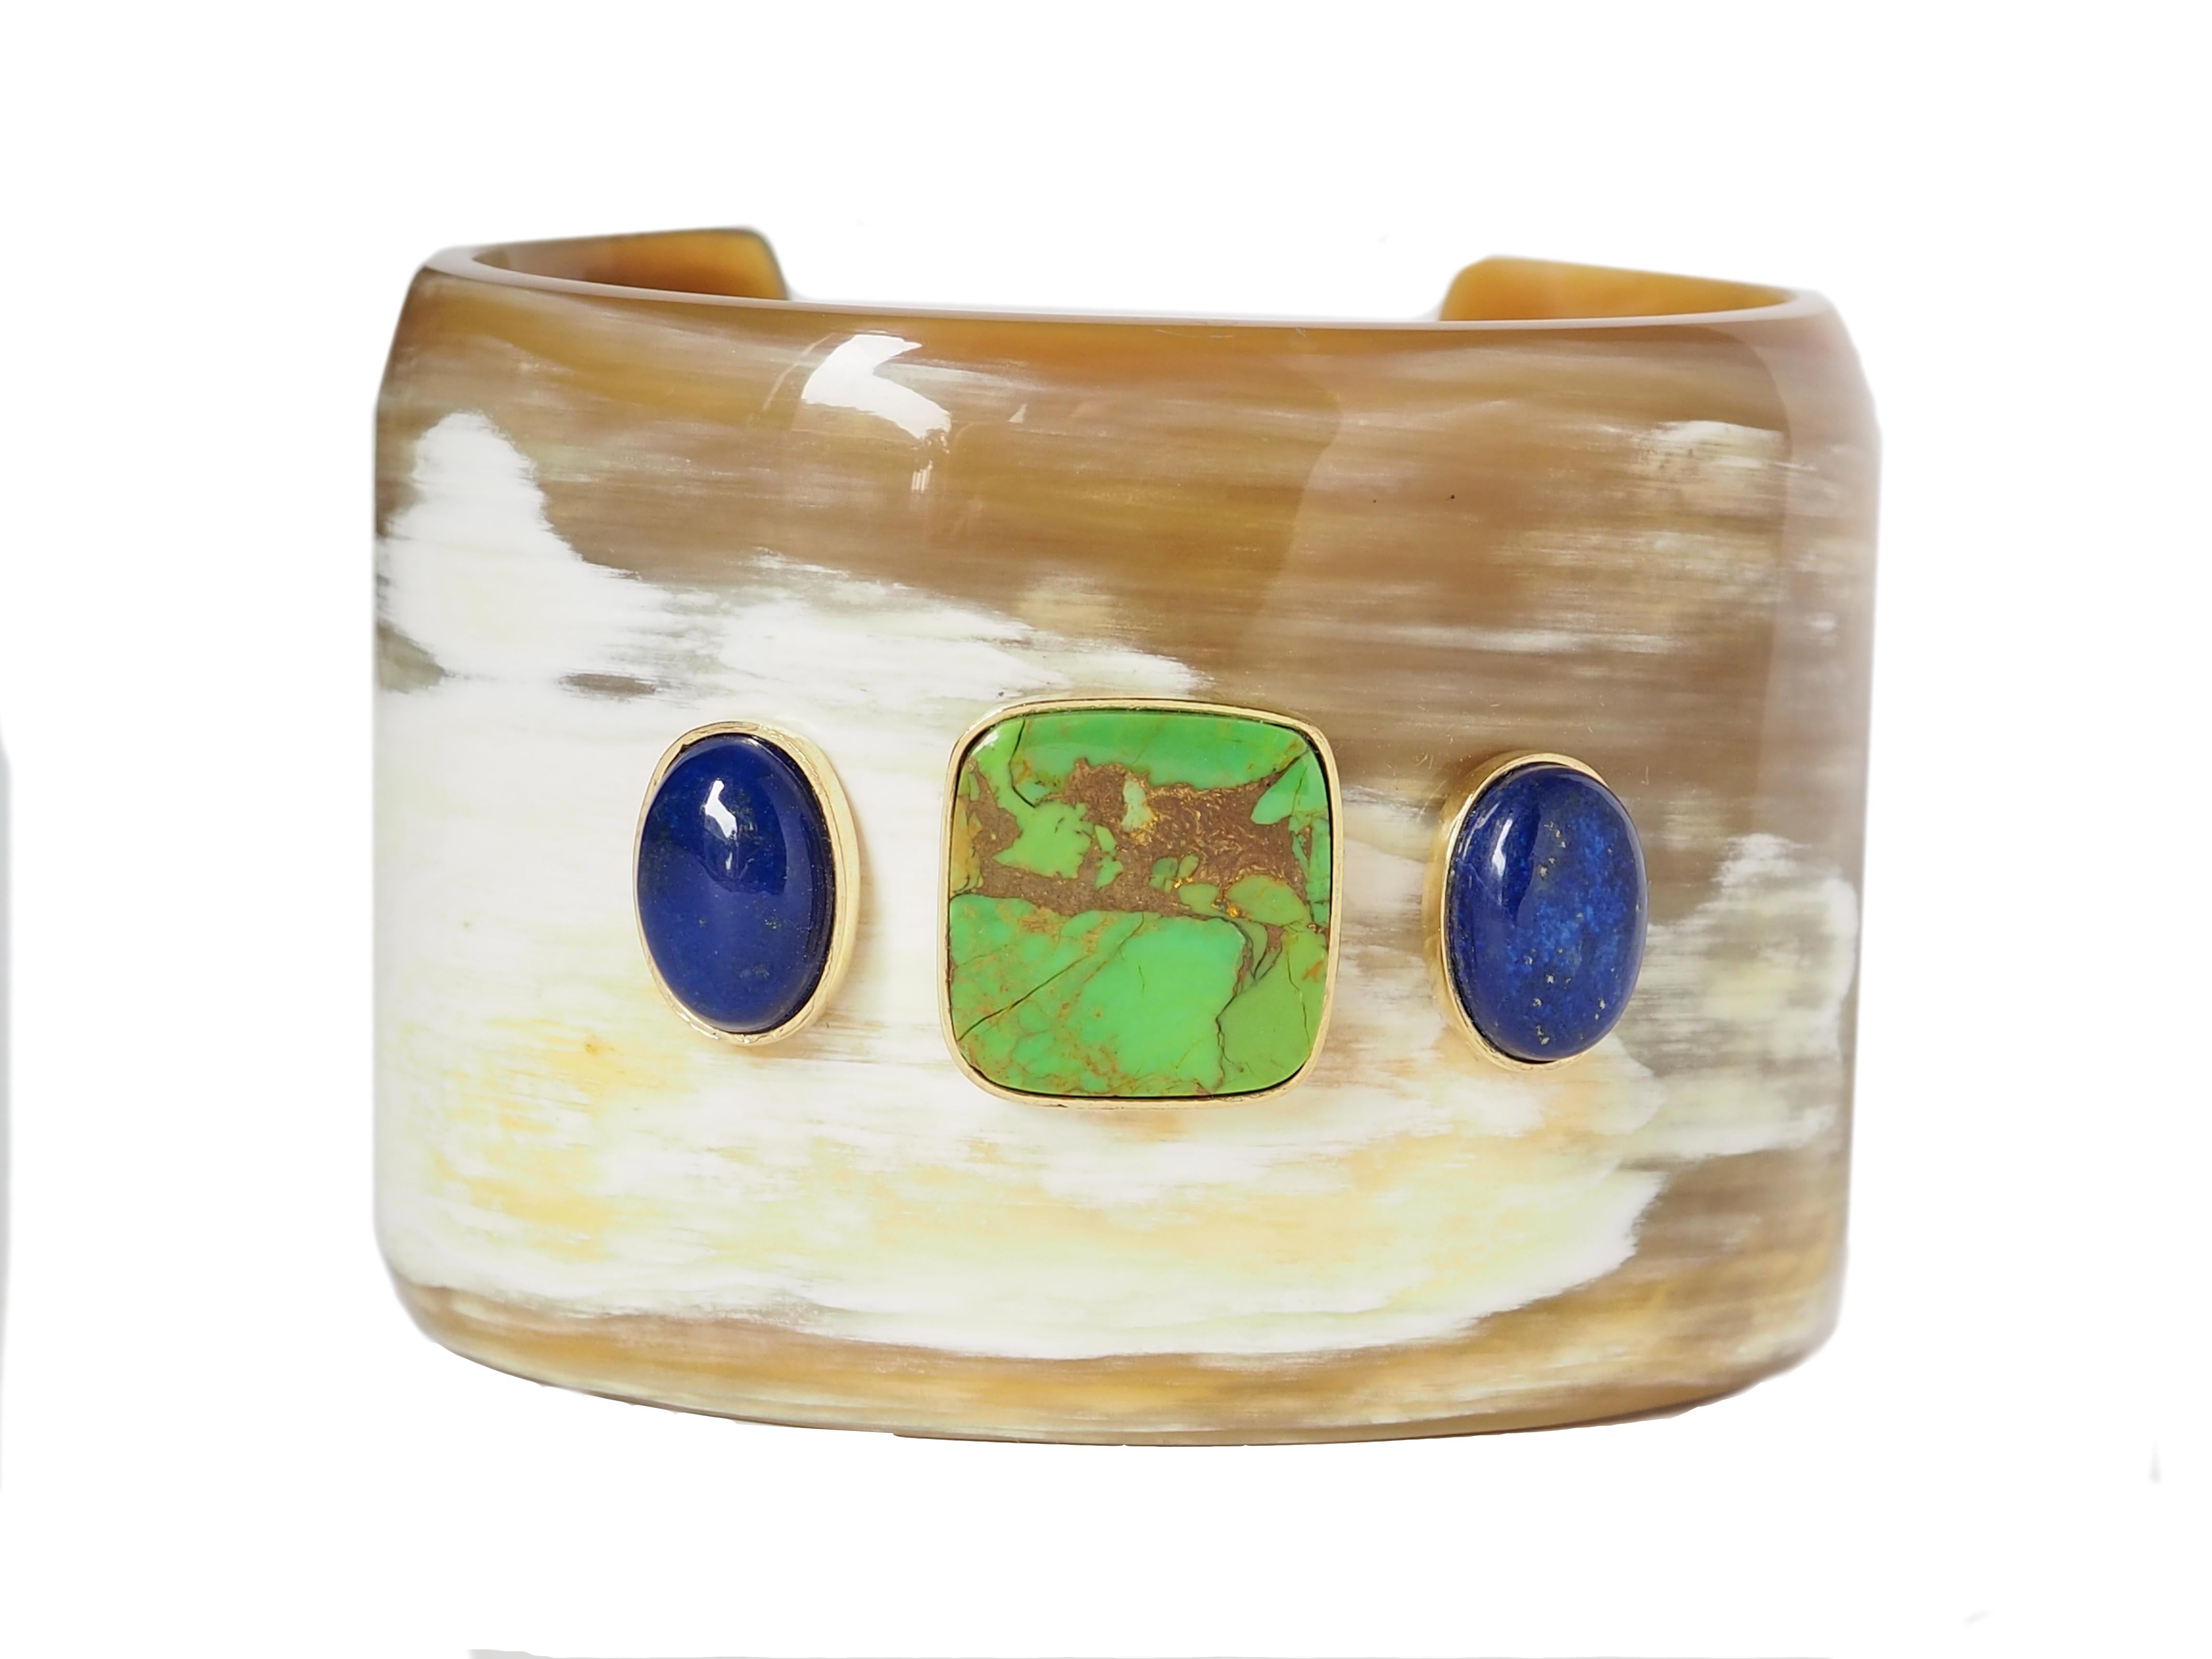 Natural Horn bangle with in the central part turquoise and blu lapis lazuli 18k Gold gr.6,70.
7cm large.
All Giulia Colussi jewelry is new and has never been previously owned or worn. Each item will arrive at your door beautifully gift wrapped in